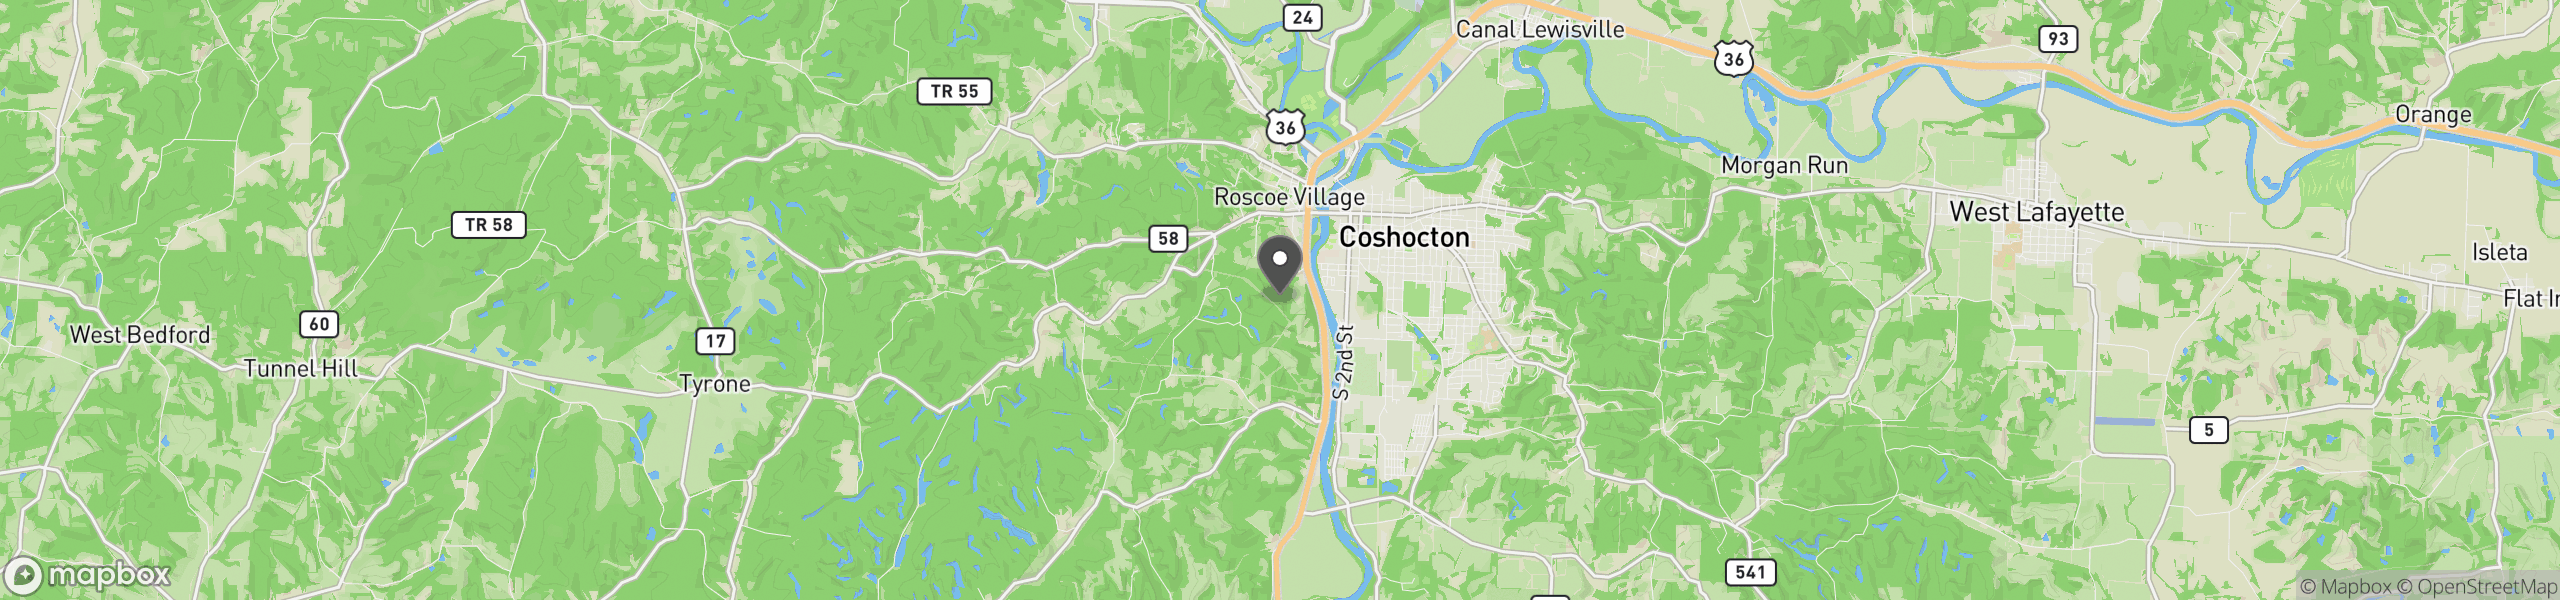 Coshocton, OH